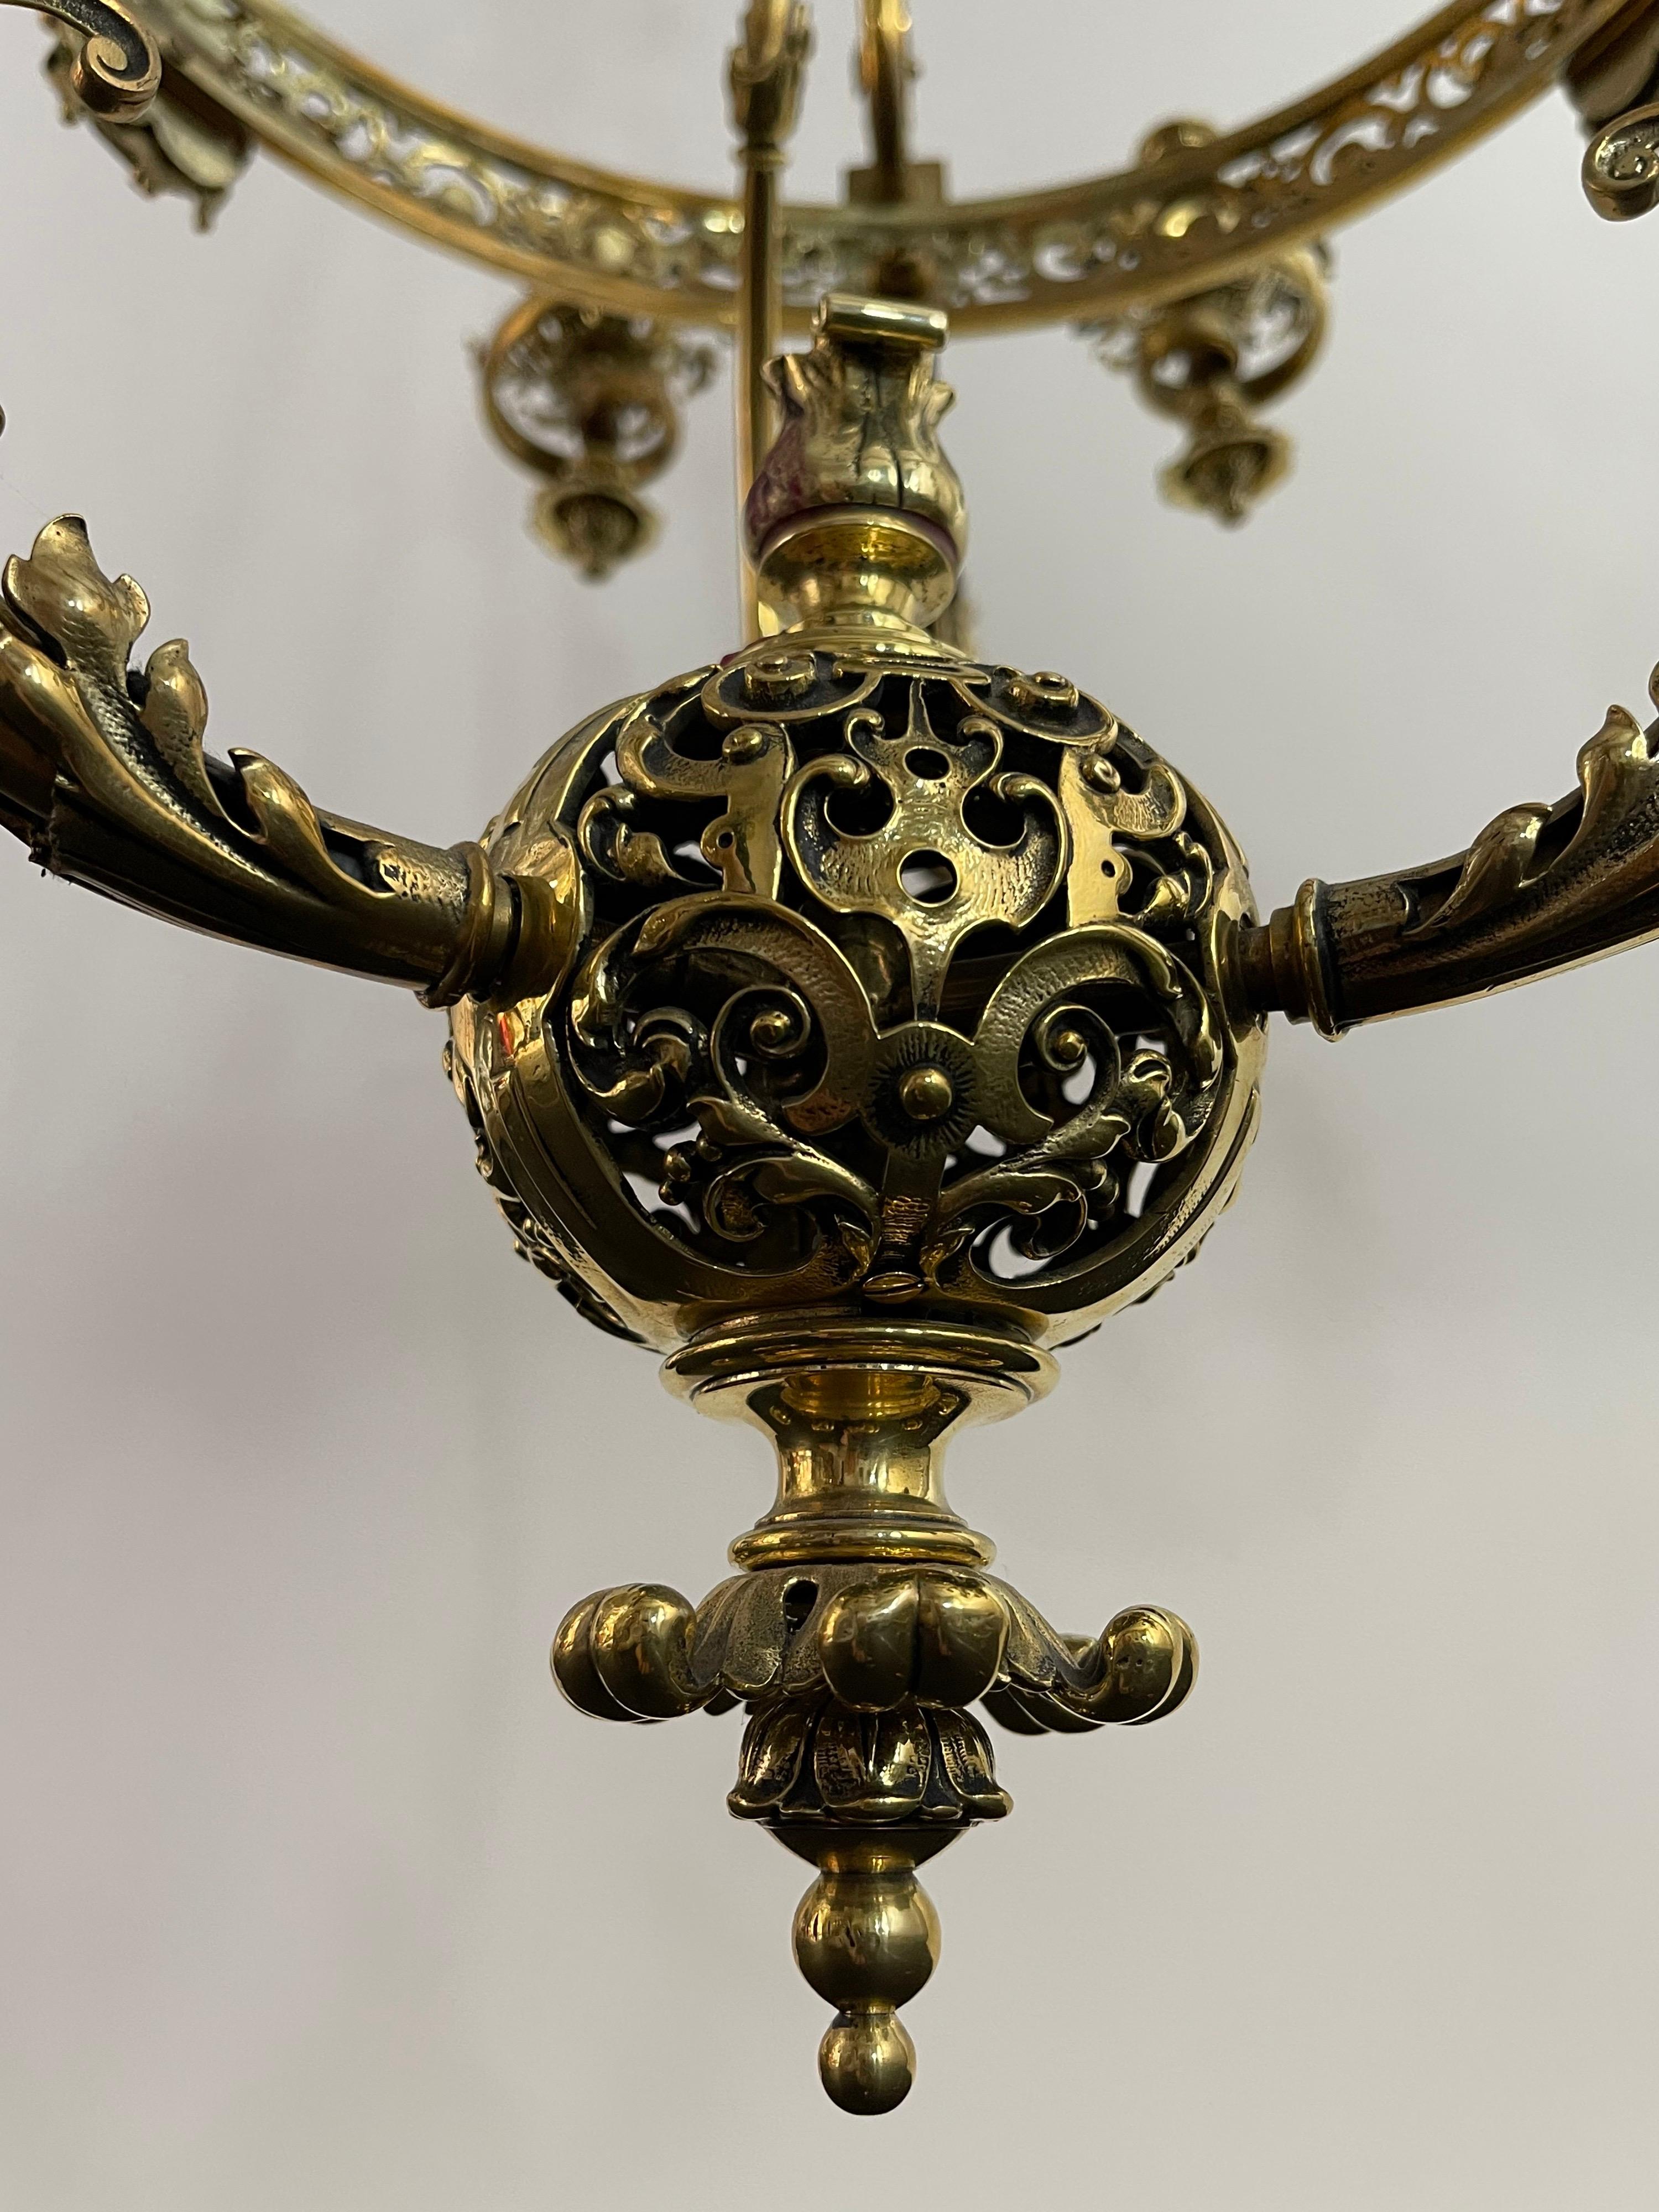 Spectacular Neoclassical Ormolu Chandelier, 18th Century For Sale 5